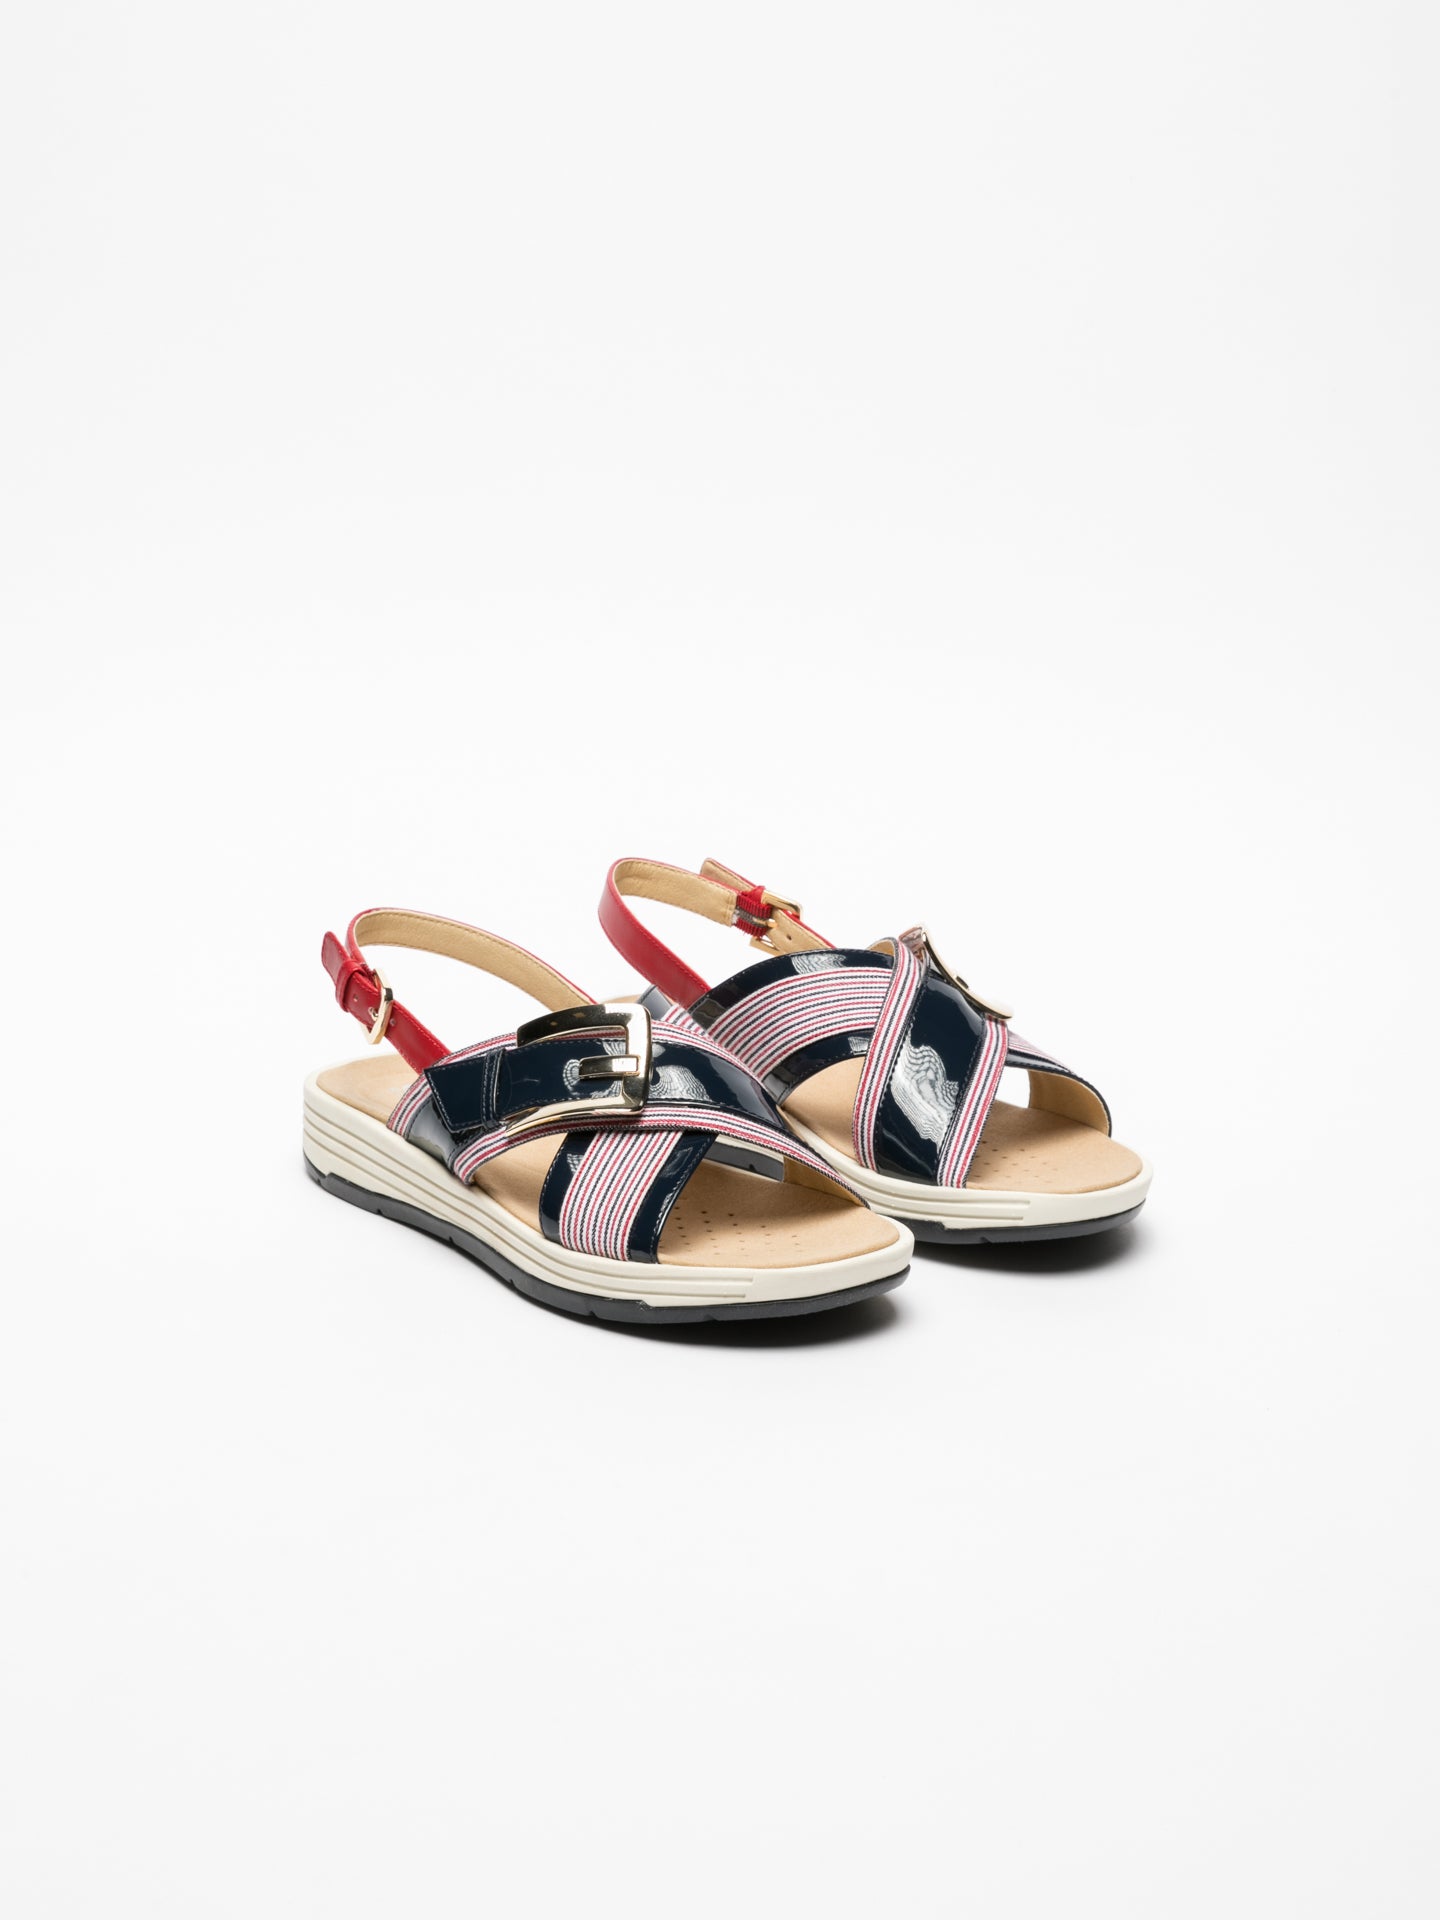 Geox Multicolor Crossover Sandals